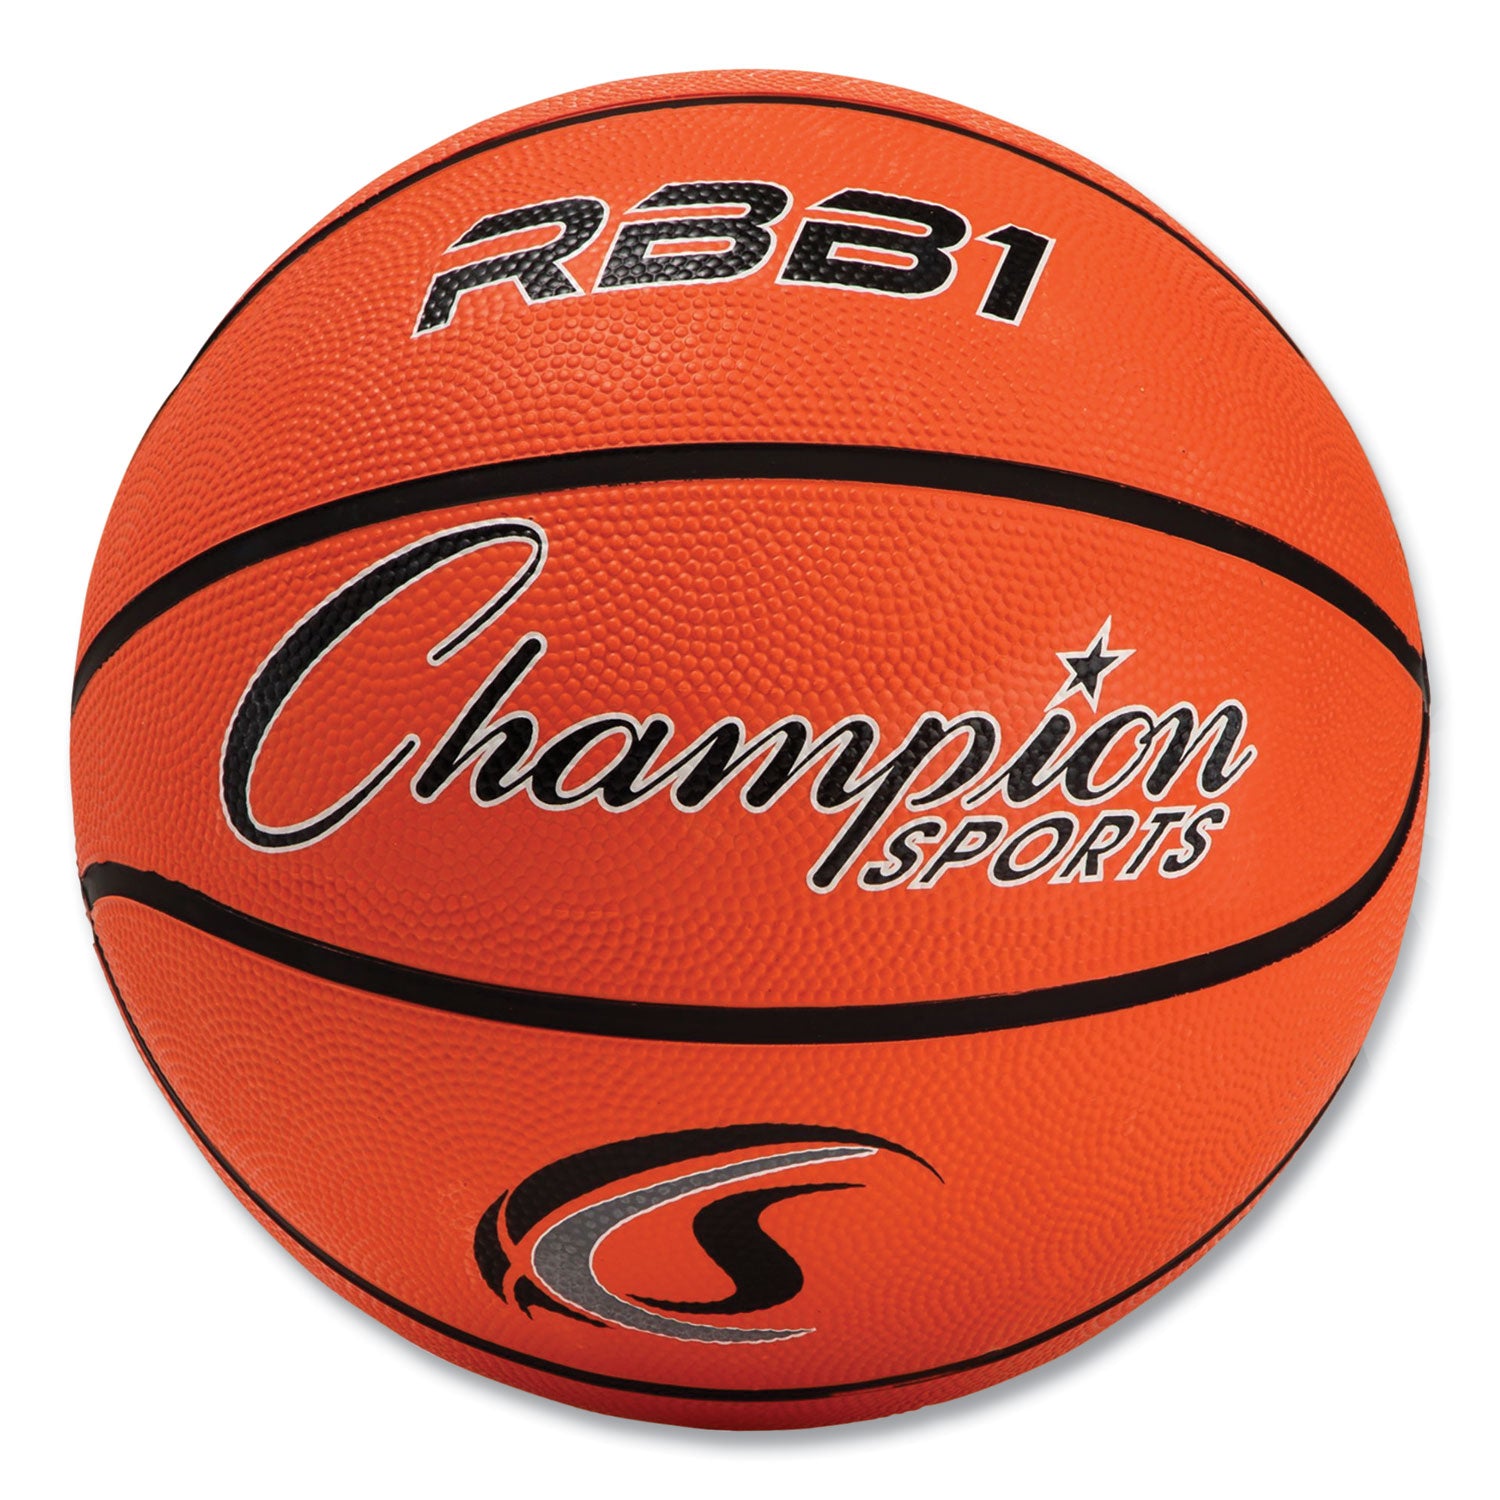 Rubber Sports Ball, For Basketball, No. 7 Size, Official Size, Orange - 